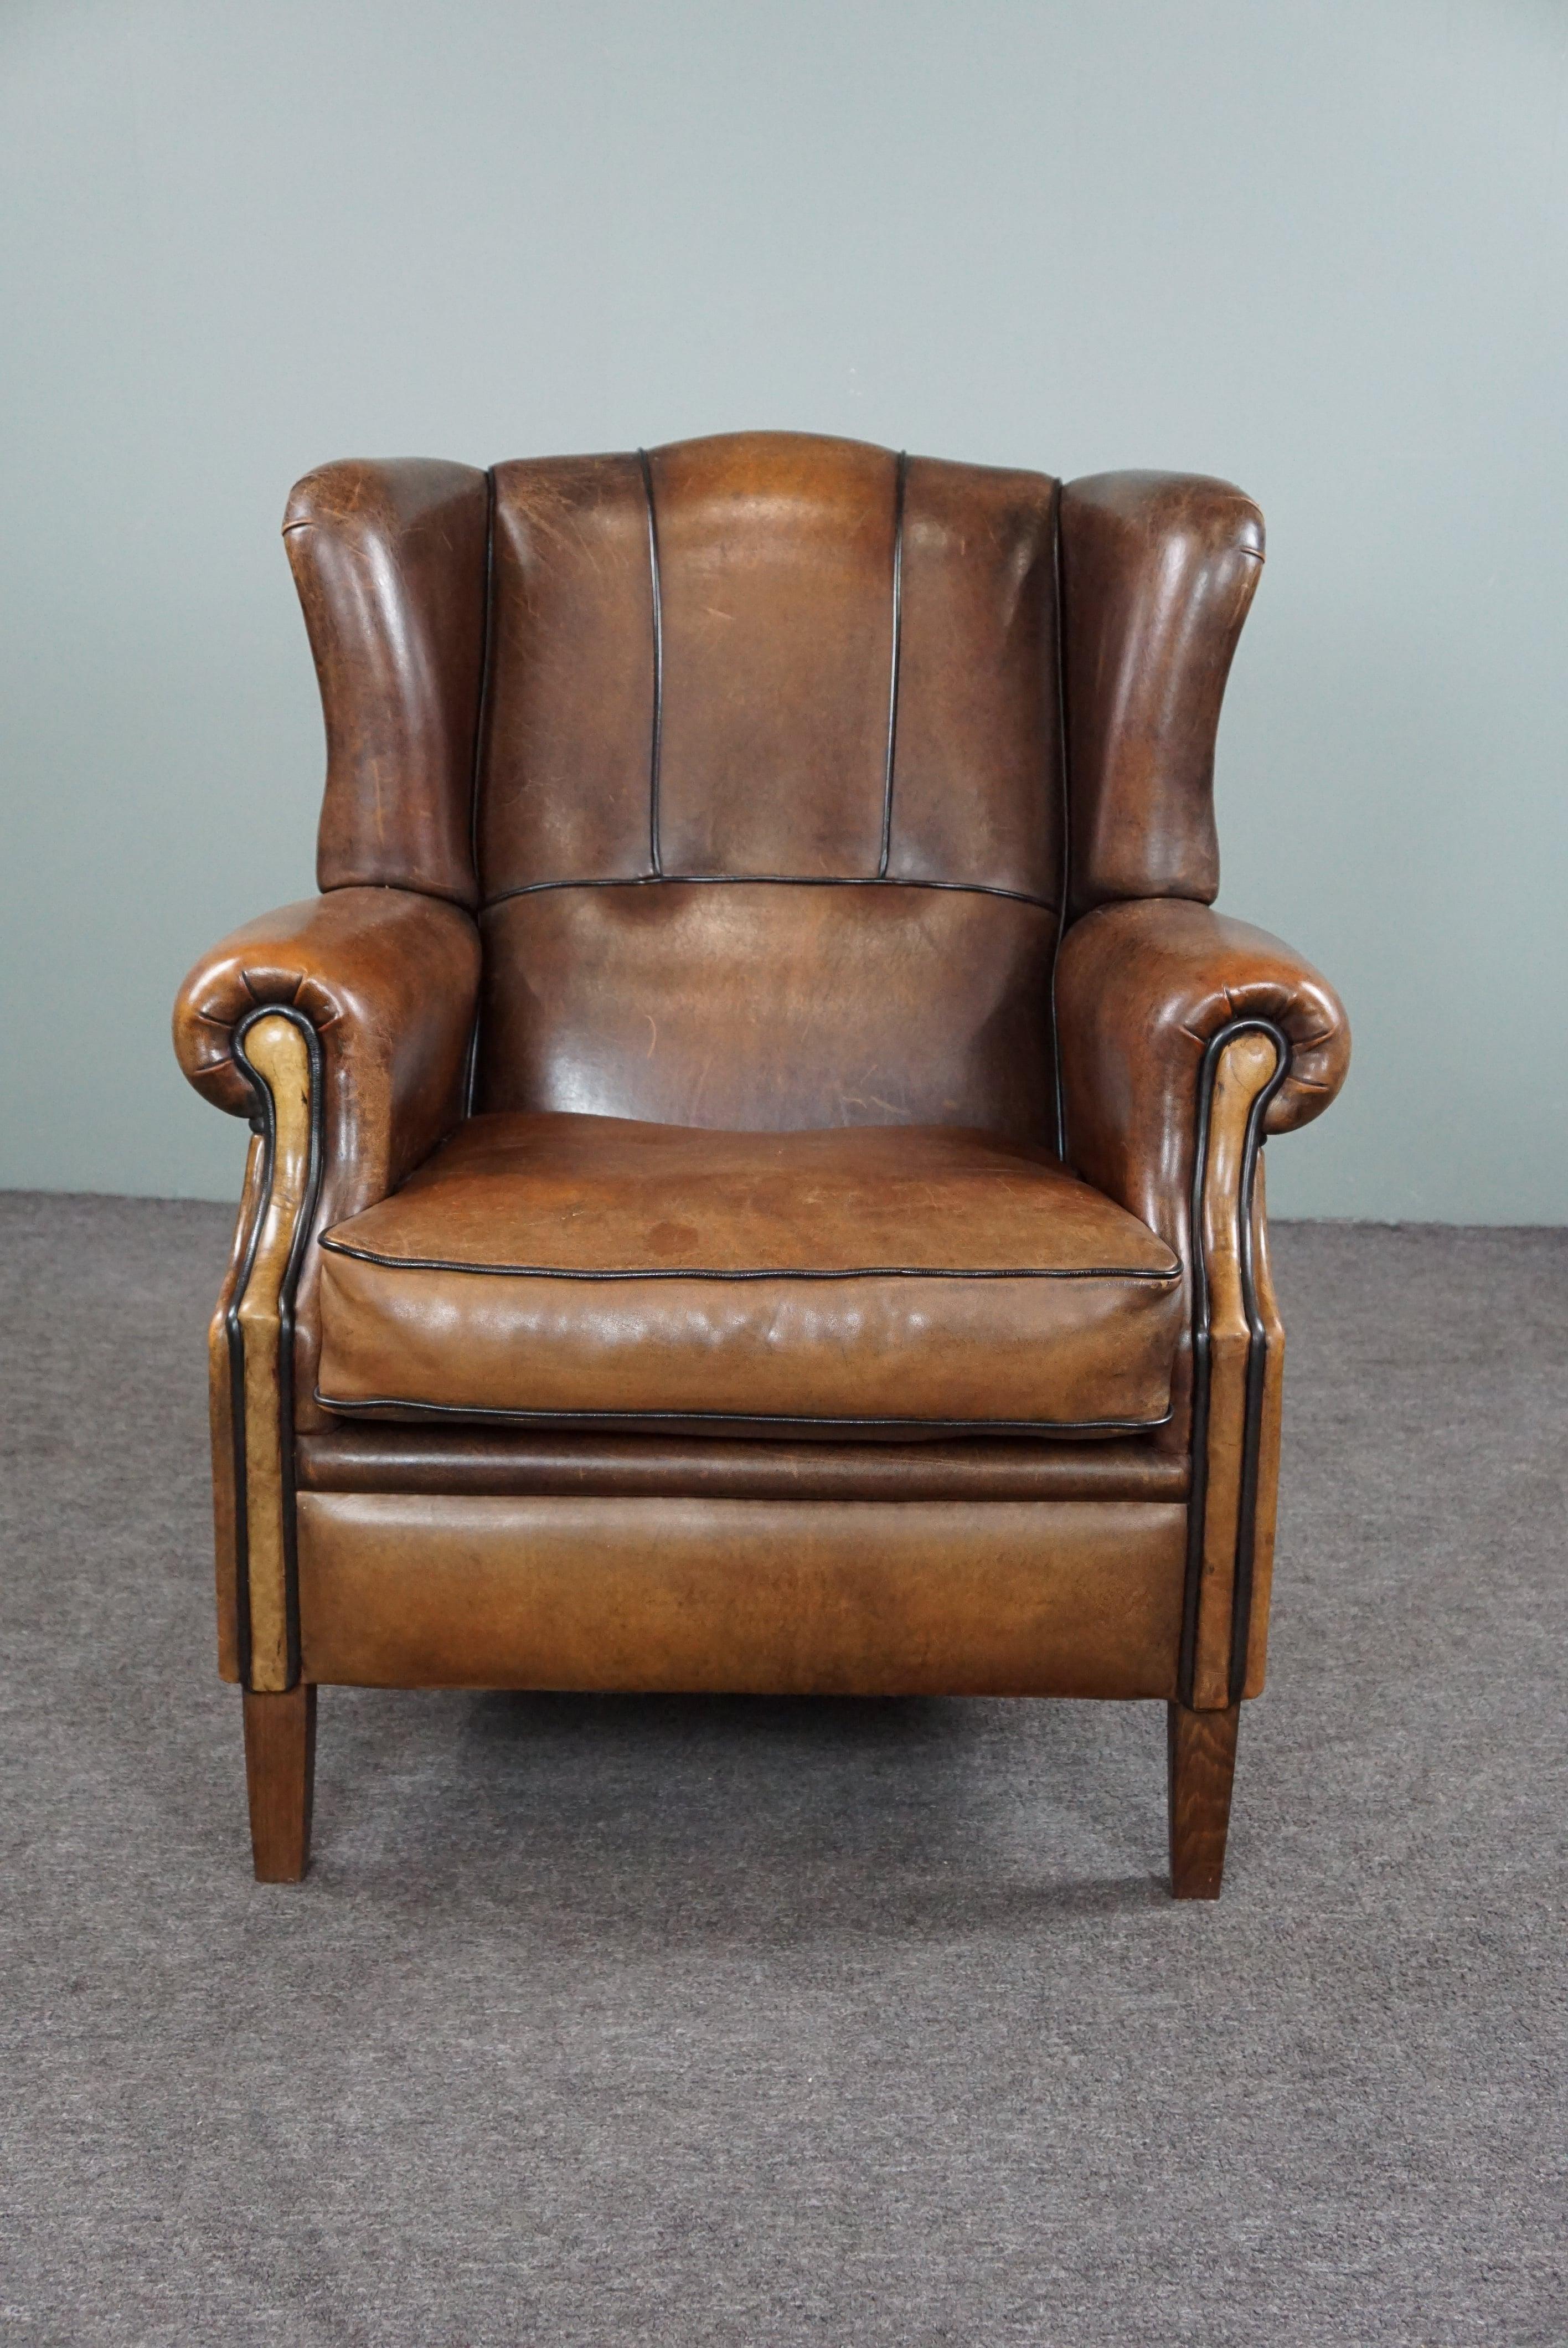 Offered is this well-fitting sheepskin leather wing chair with a very expressive division in the leather.

This strikingly colored and comfortable wing chair is a very good addition to almost any interior in terms of appearance and patina. The